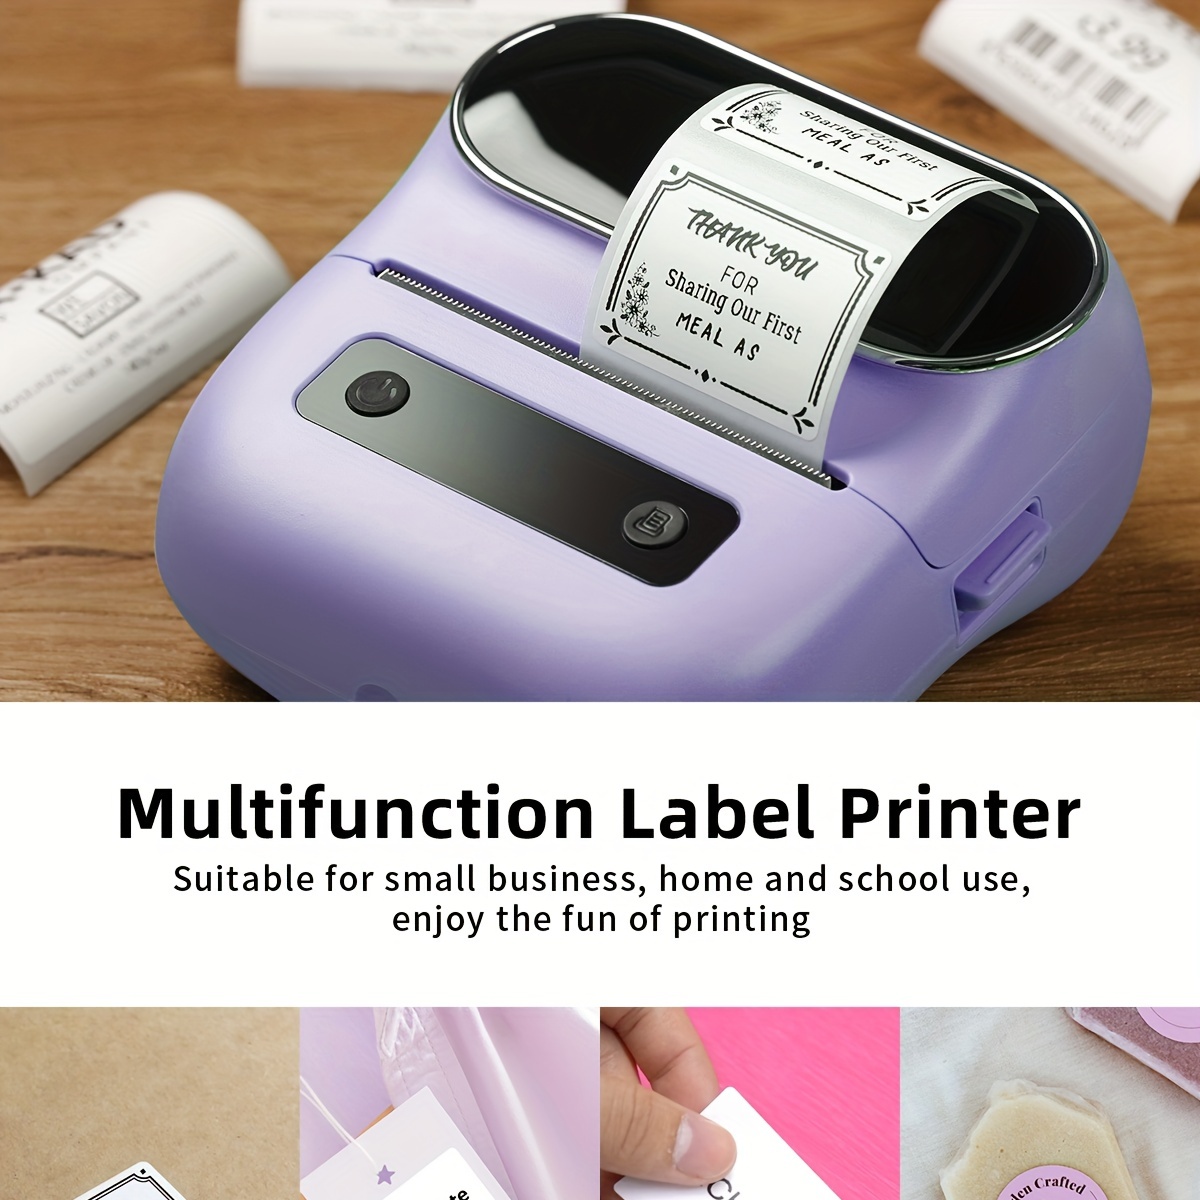 Phomemo Label Printer - M110 Thermal Label Printer, Upgraded Bluetooth  Portable Label Maker for Product, Address, Small Business, Sticker, Home,  DIY